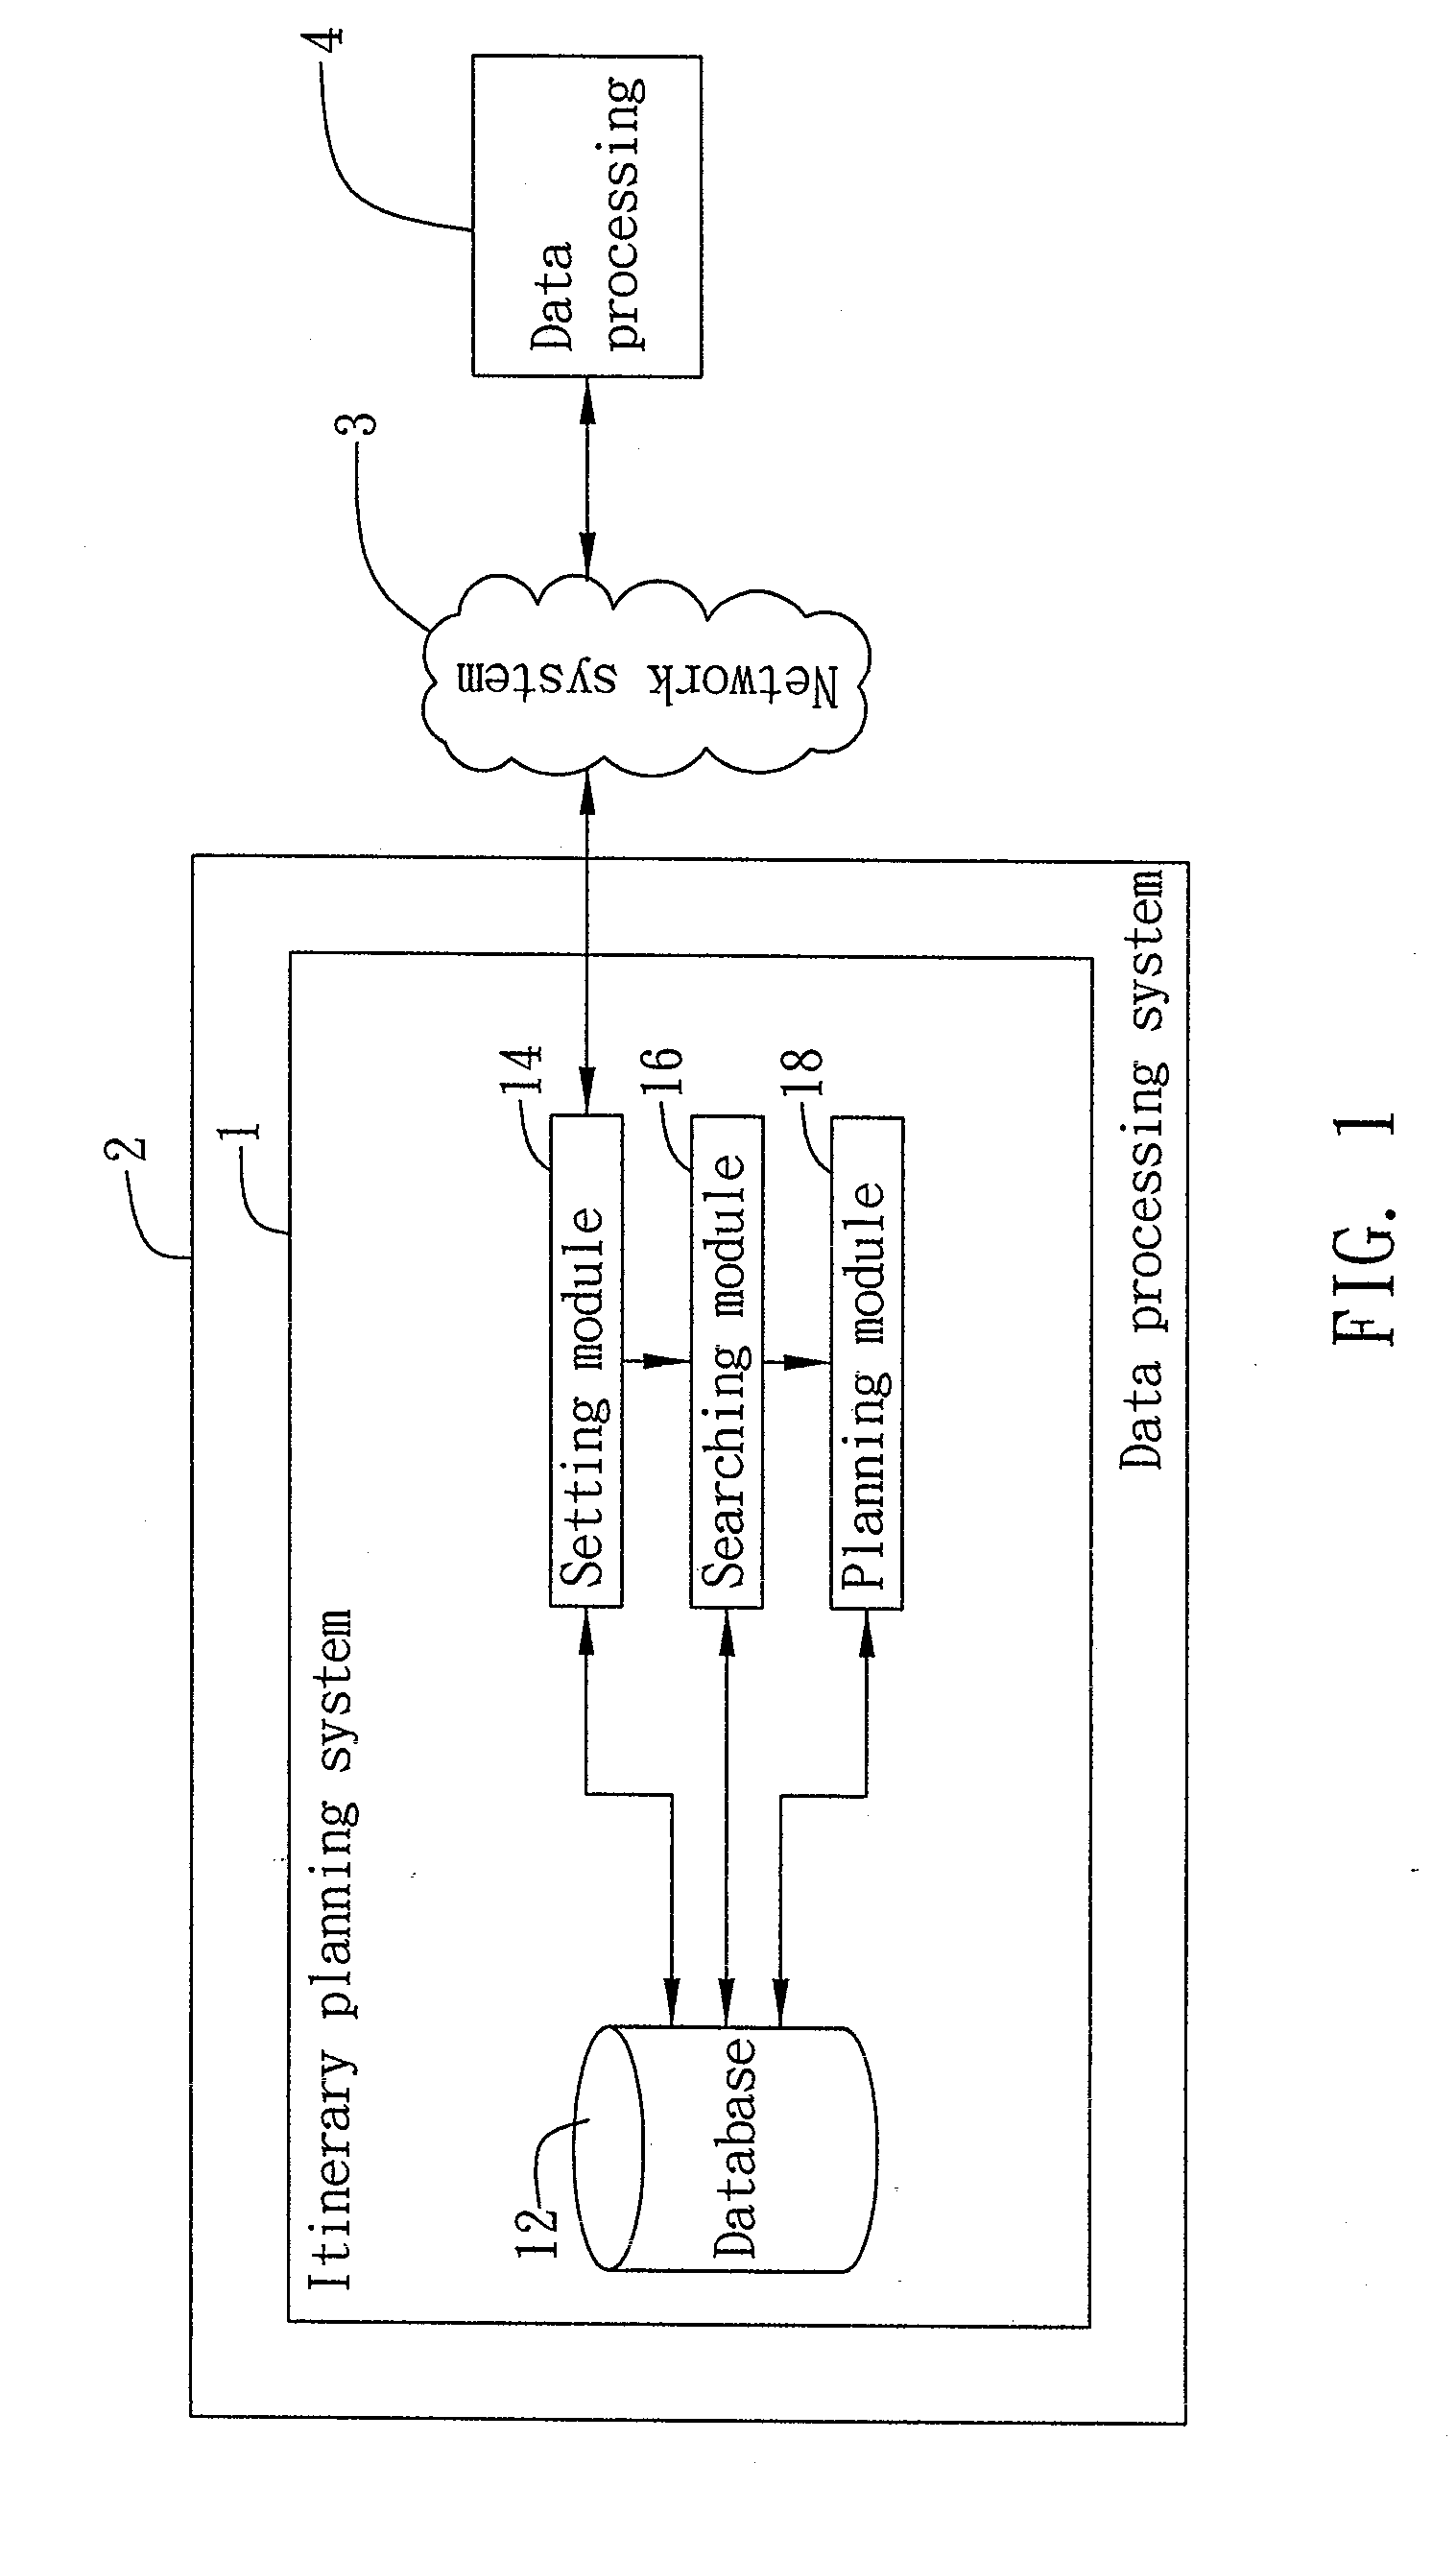 Itinerary planning system and method